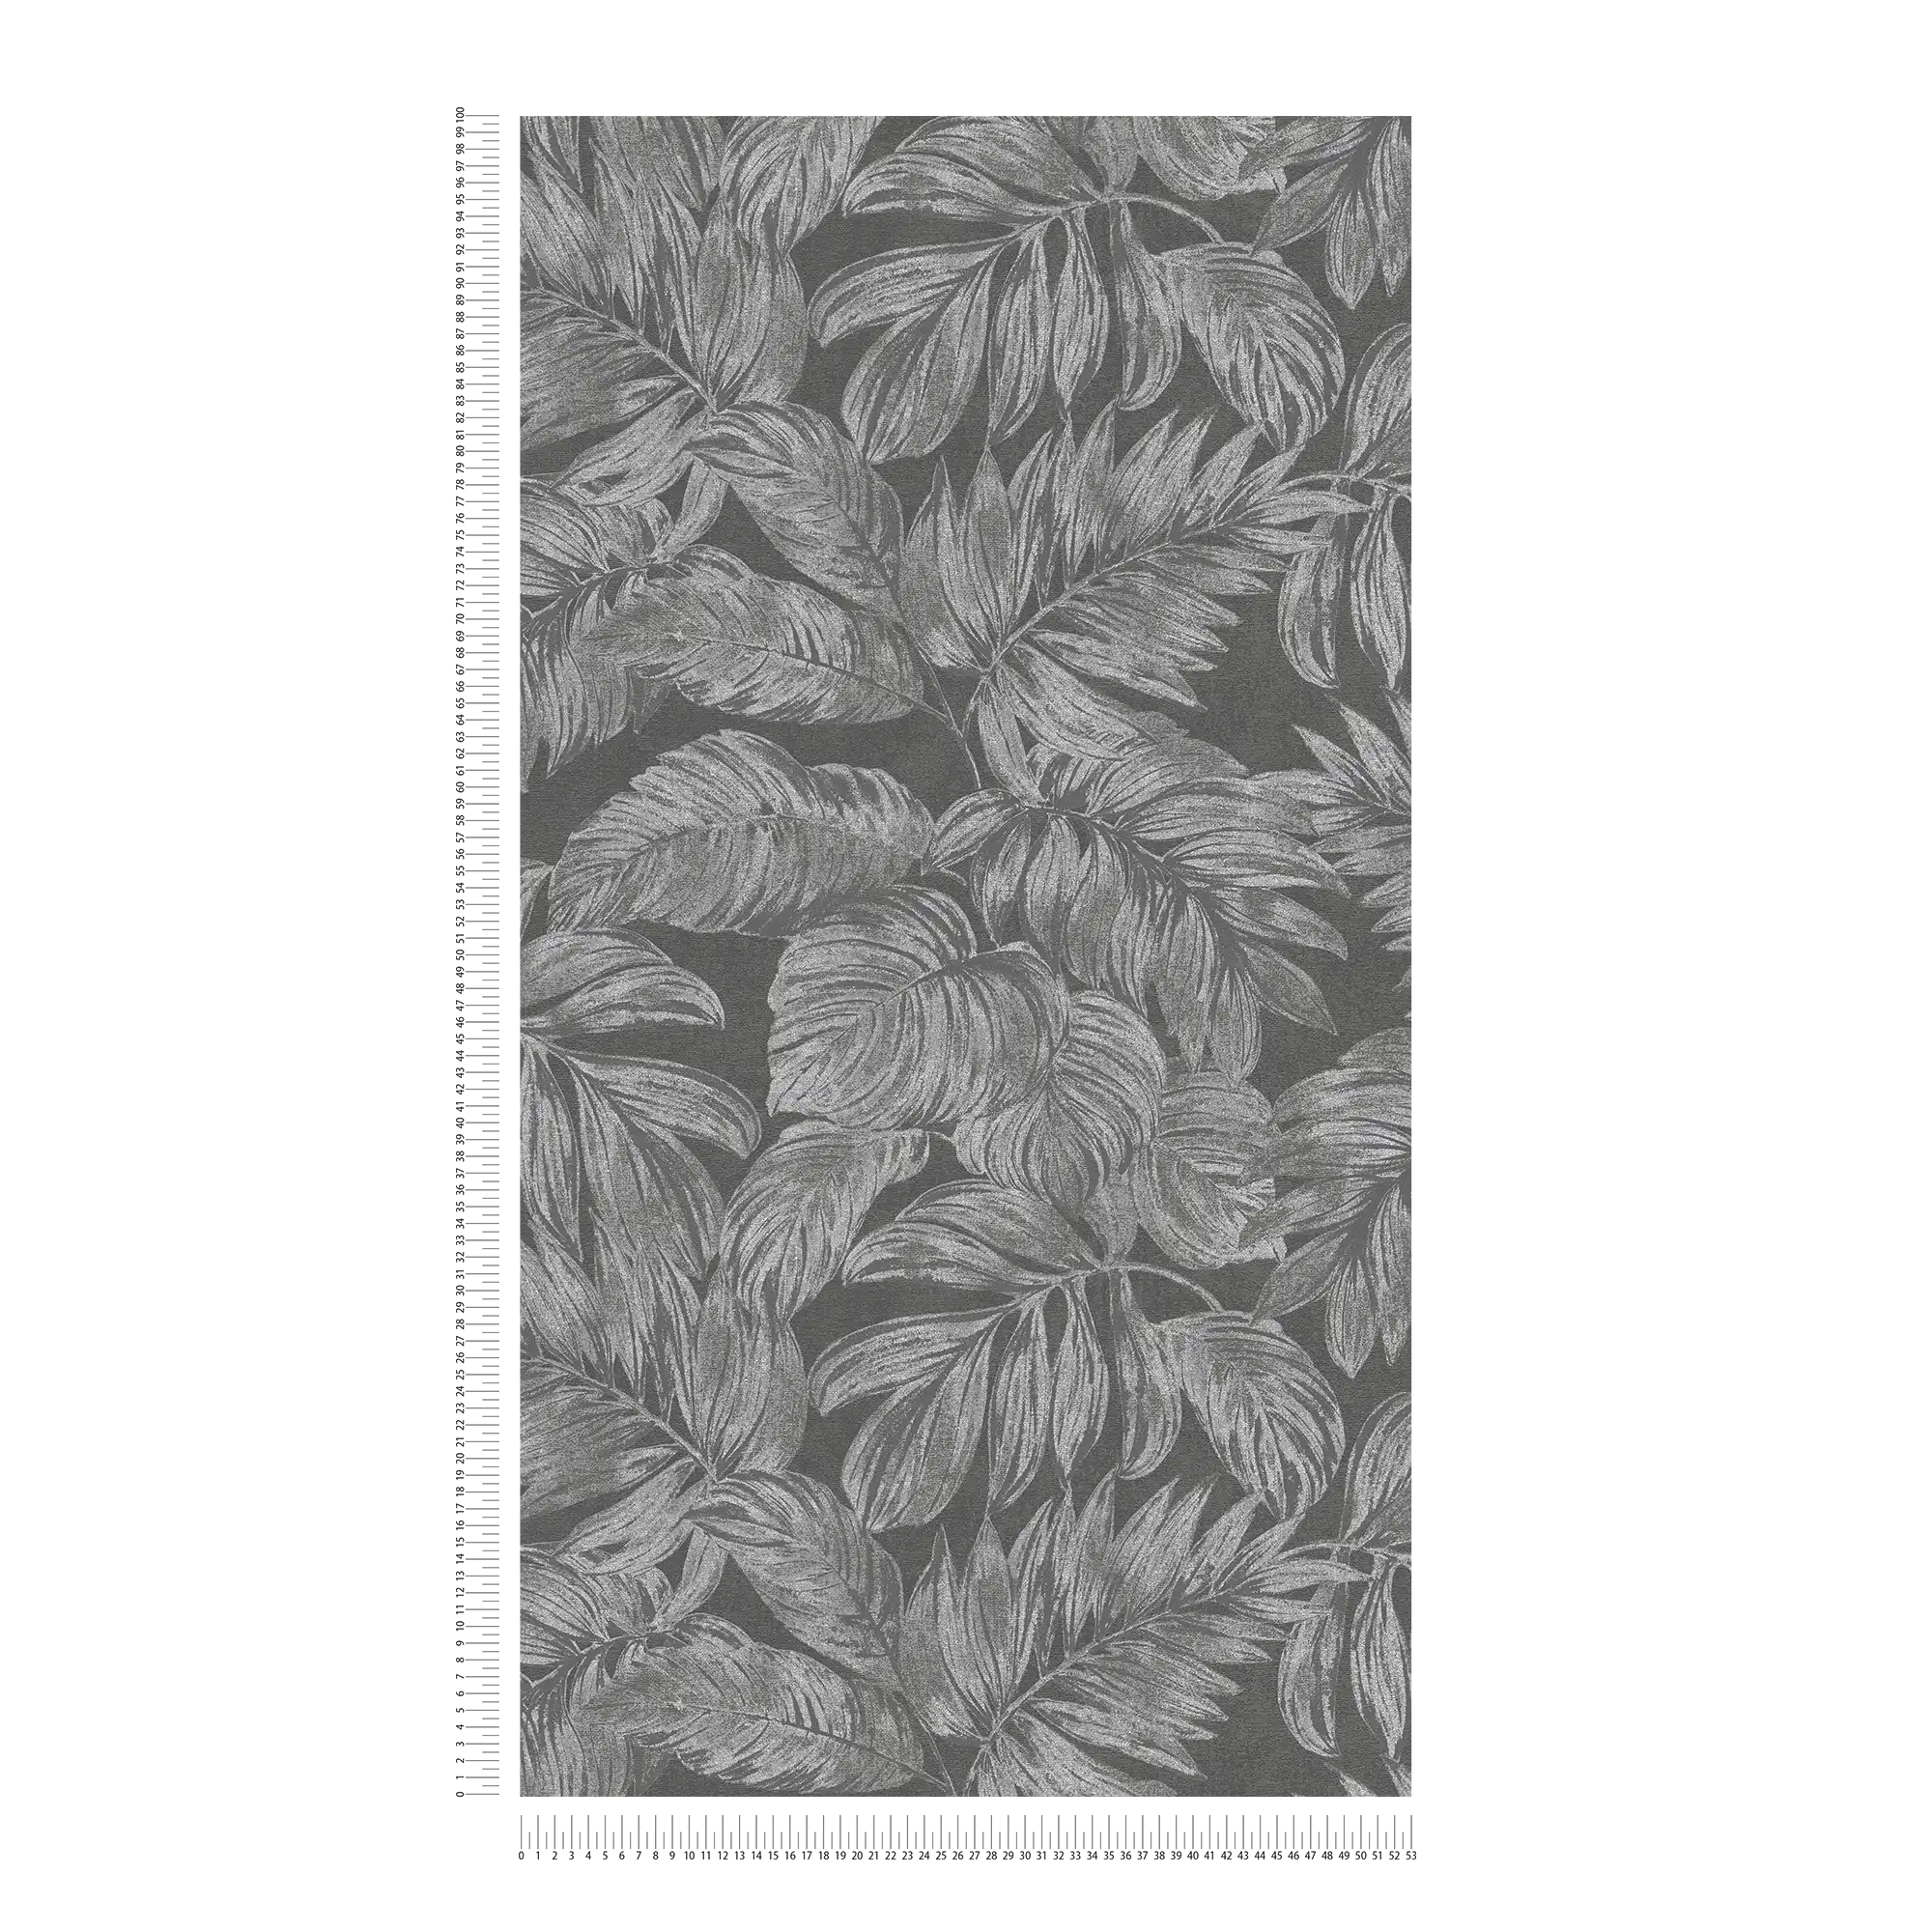             Floral non-woven wallpaper with jungle pattern - anthracite, grey, silver
        